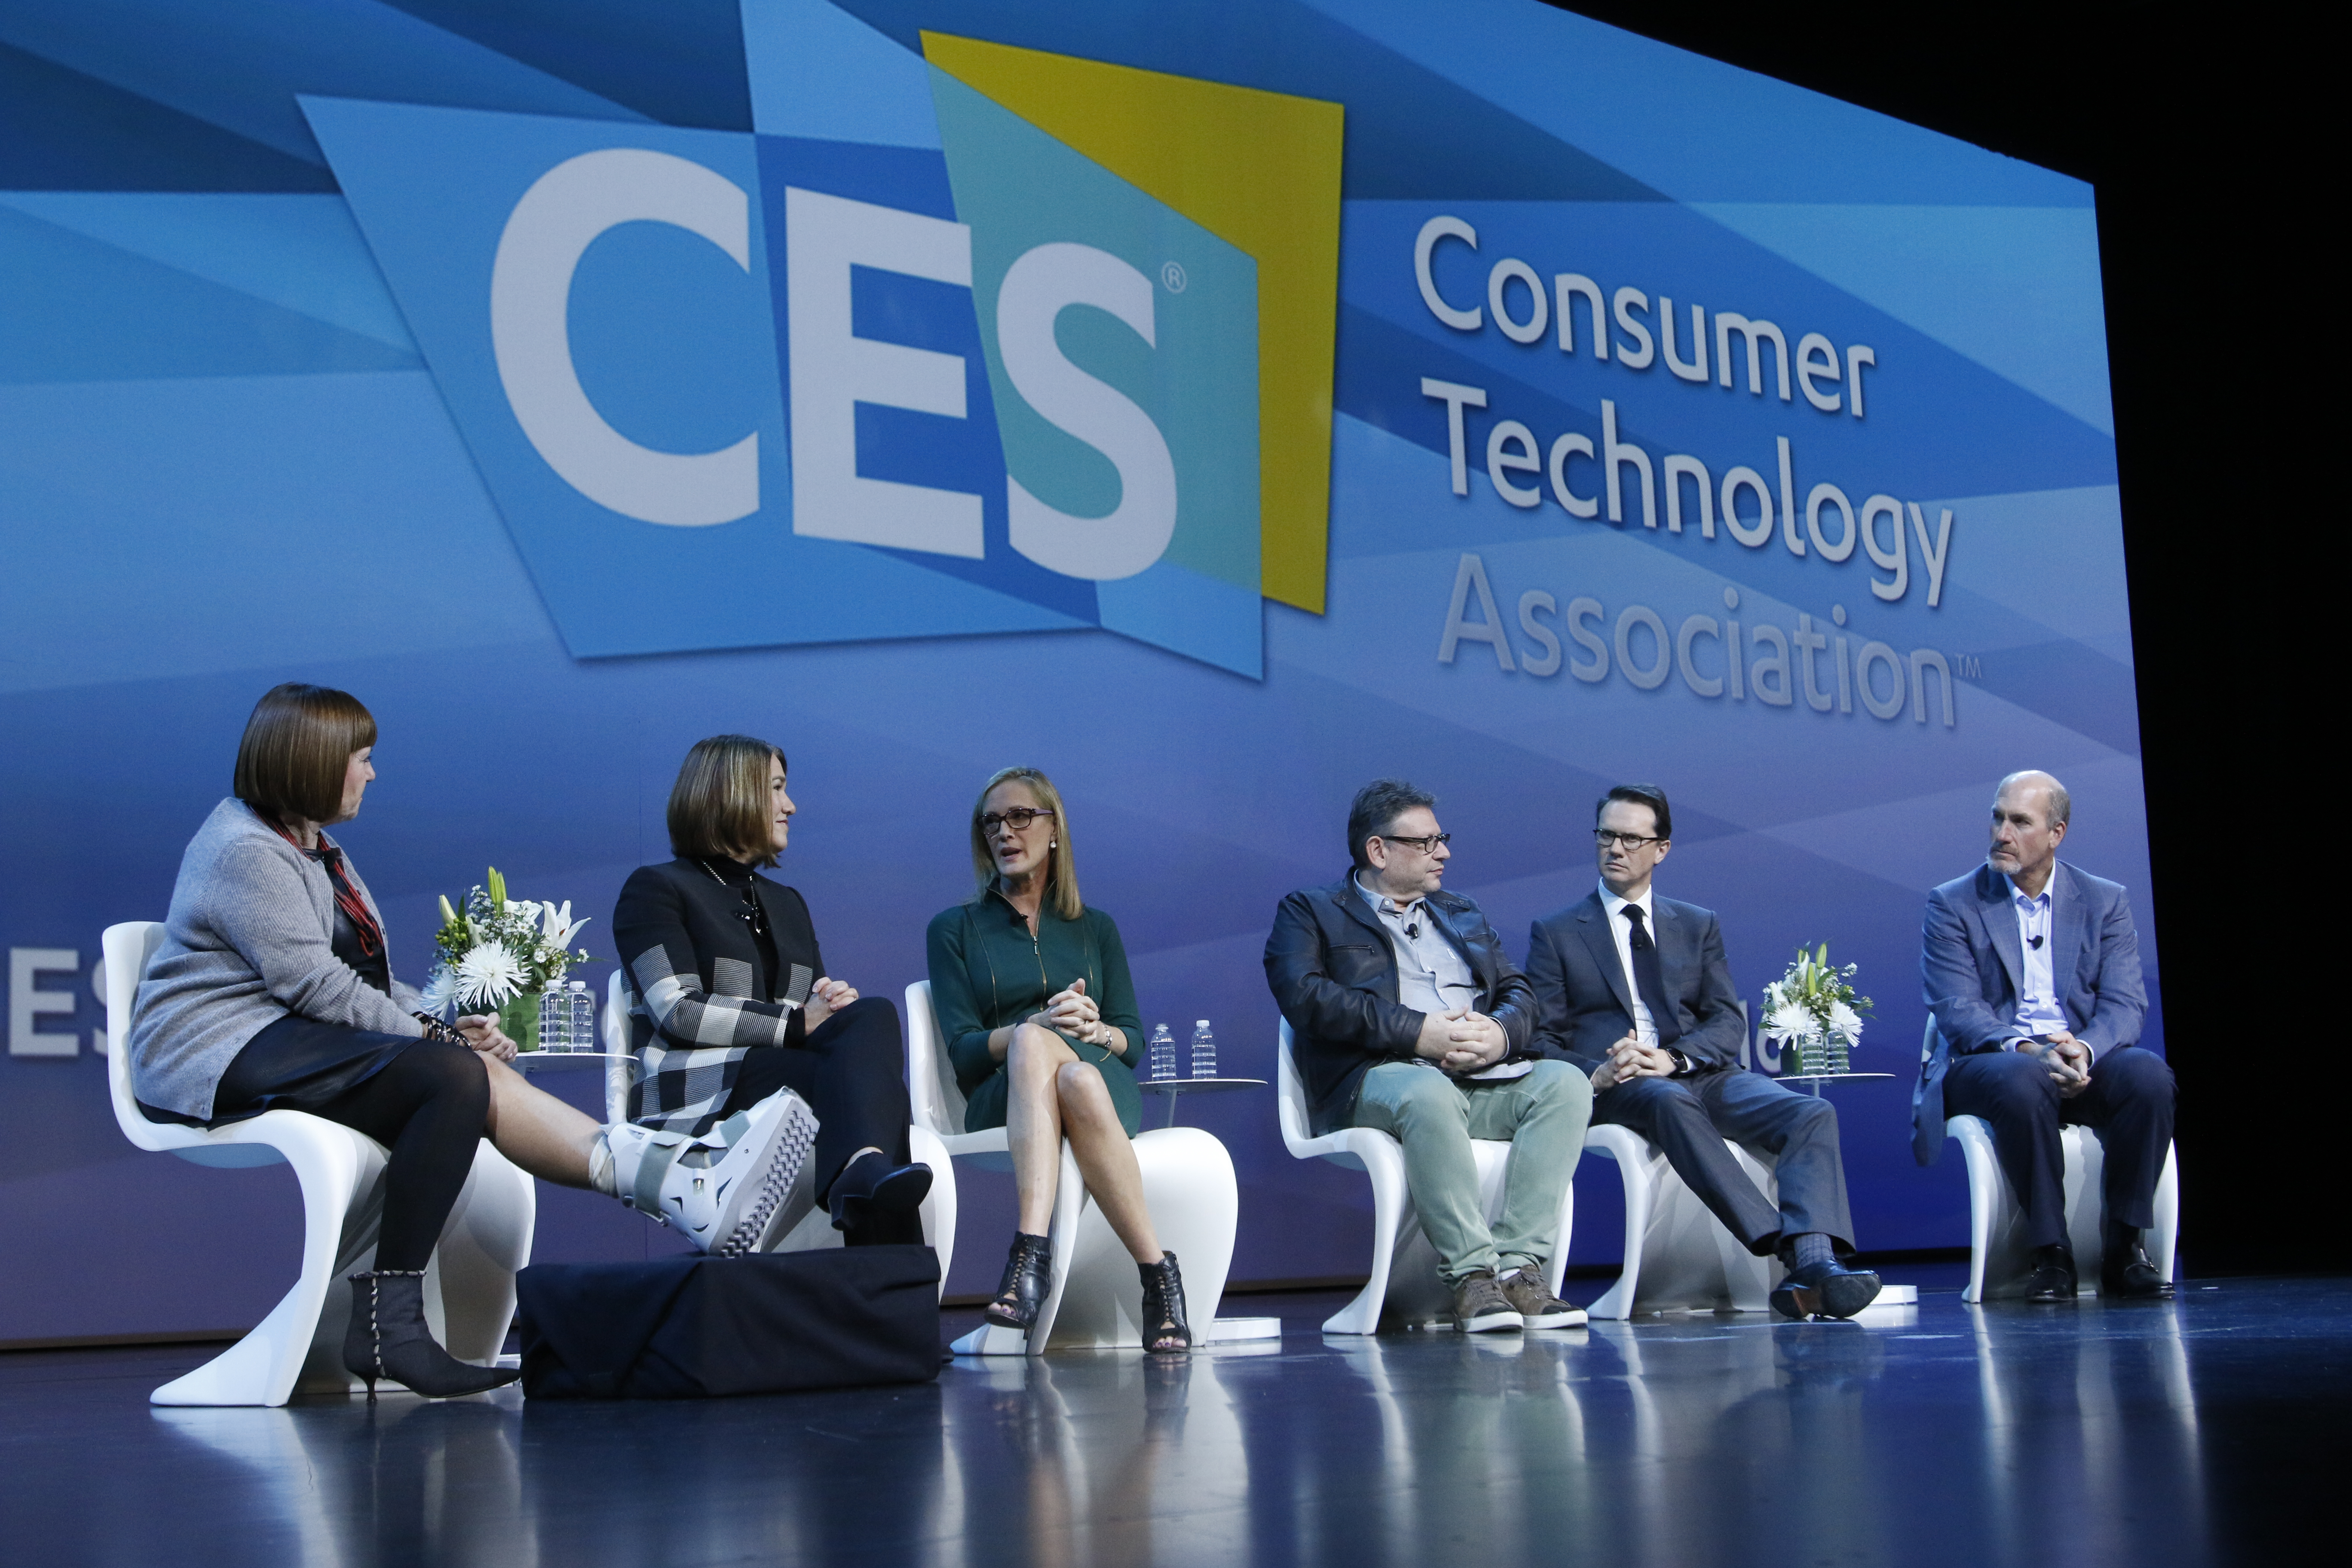 The future of technology, showcased at CES 2016